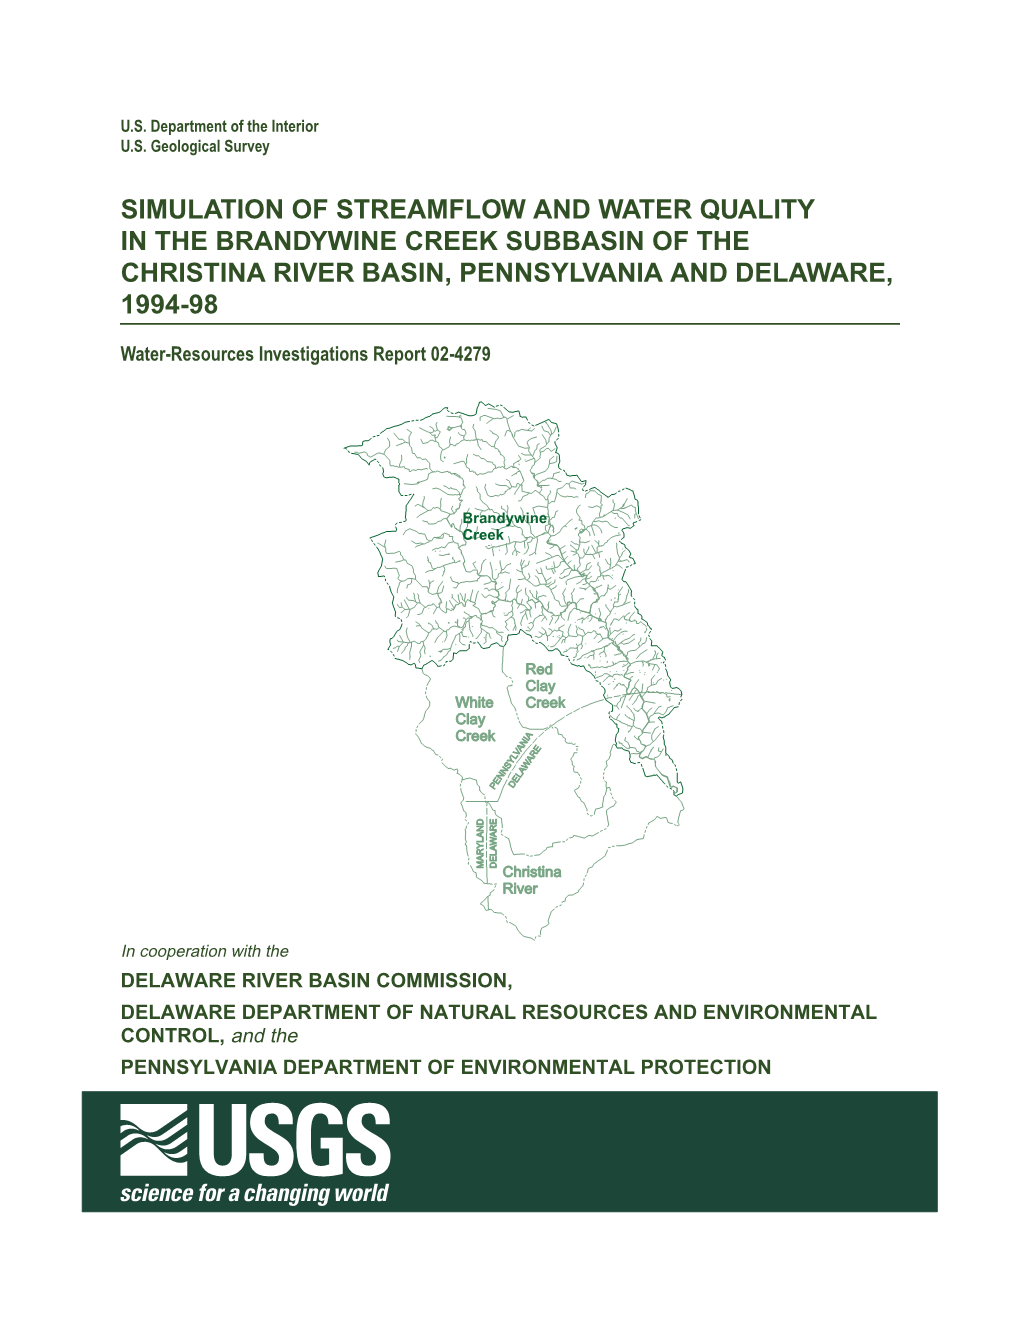 Simulation of Streamflow and Water Quality in the Brandywine Creek Subbasin of the Christina River Basin, Pennsylvania and Delaware, 1994-98